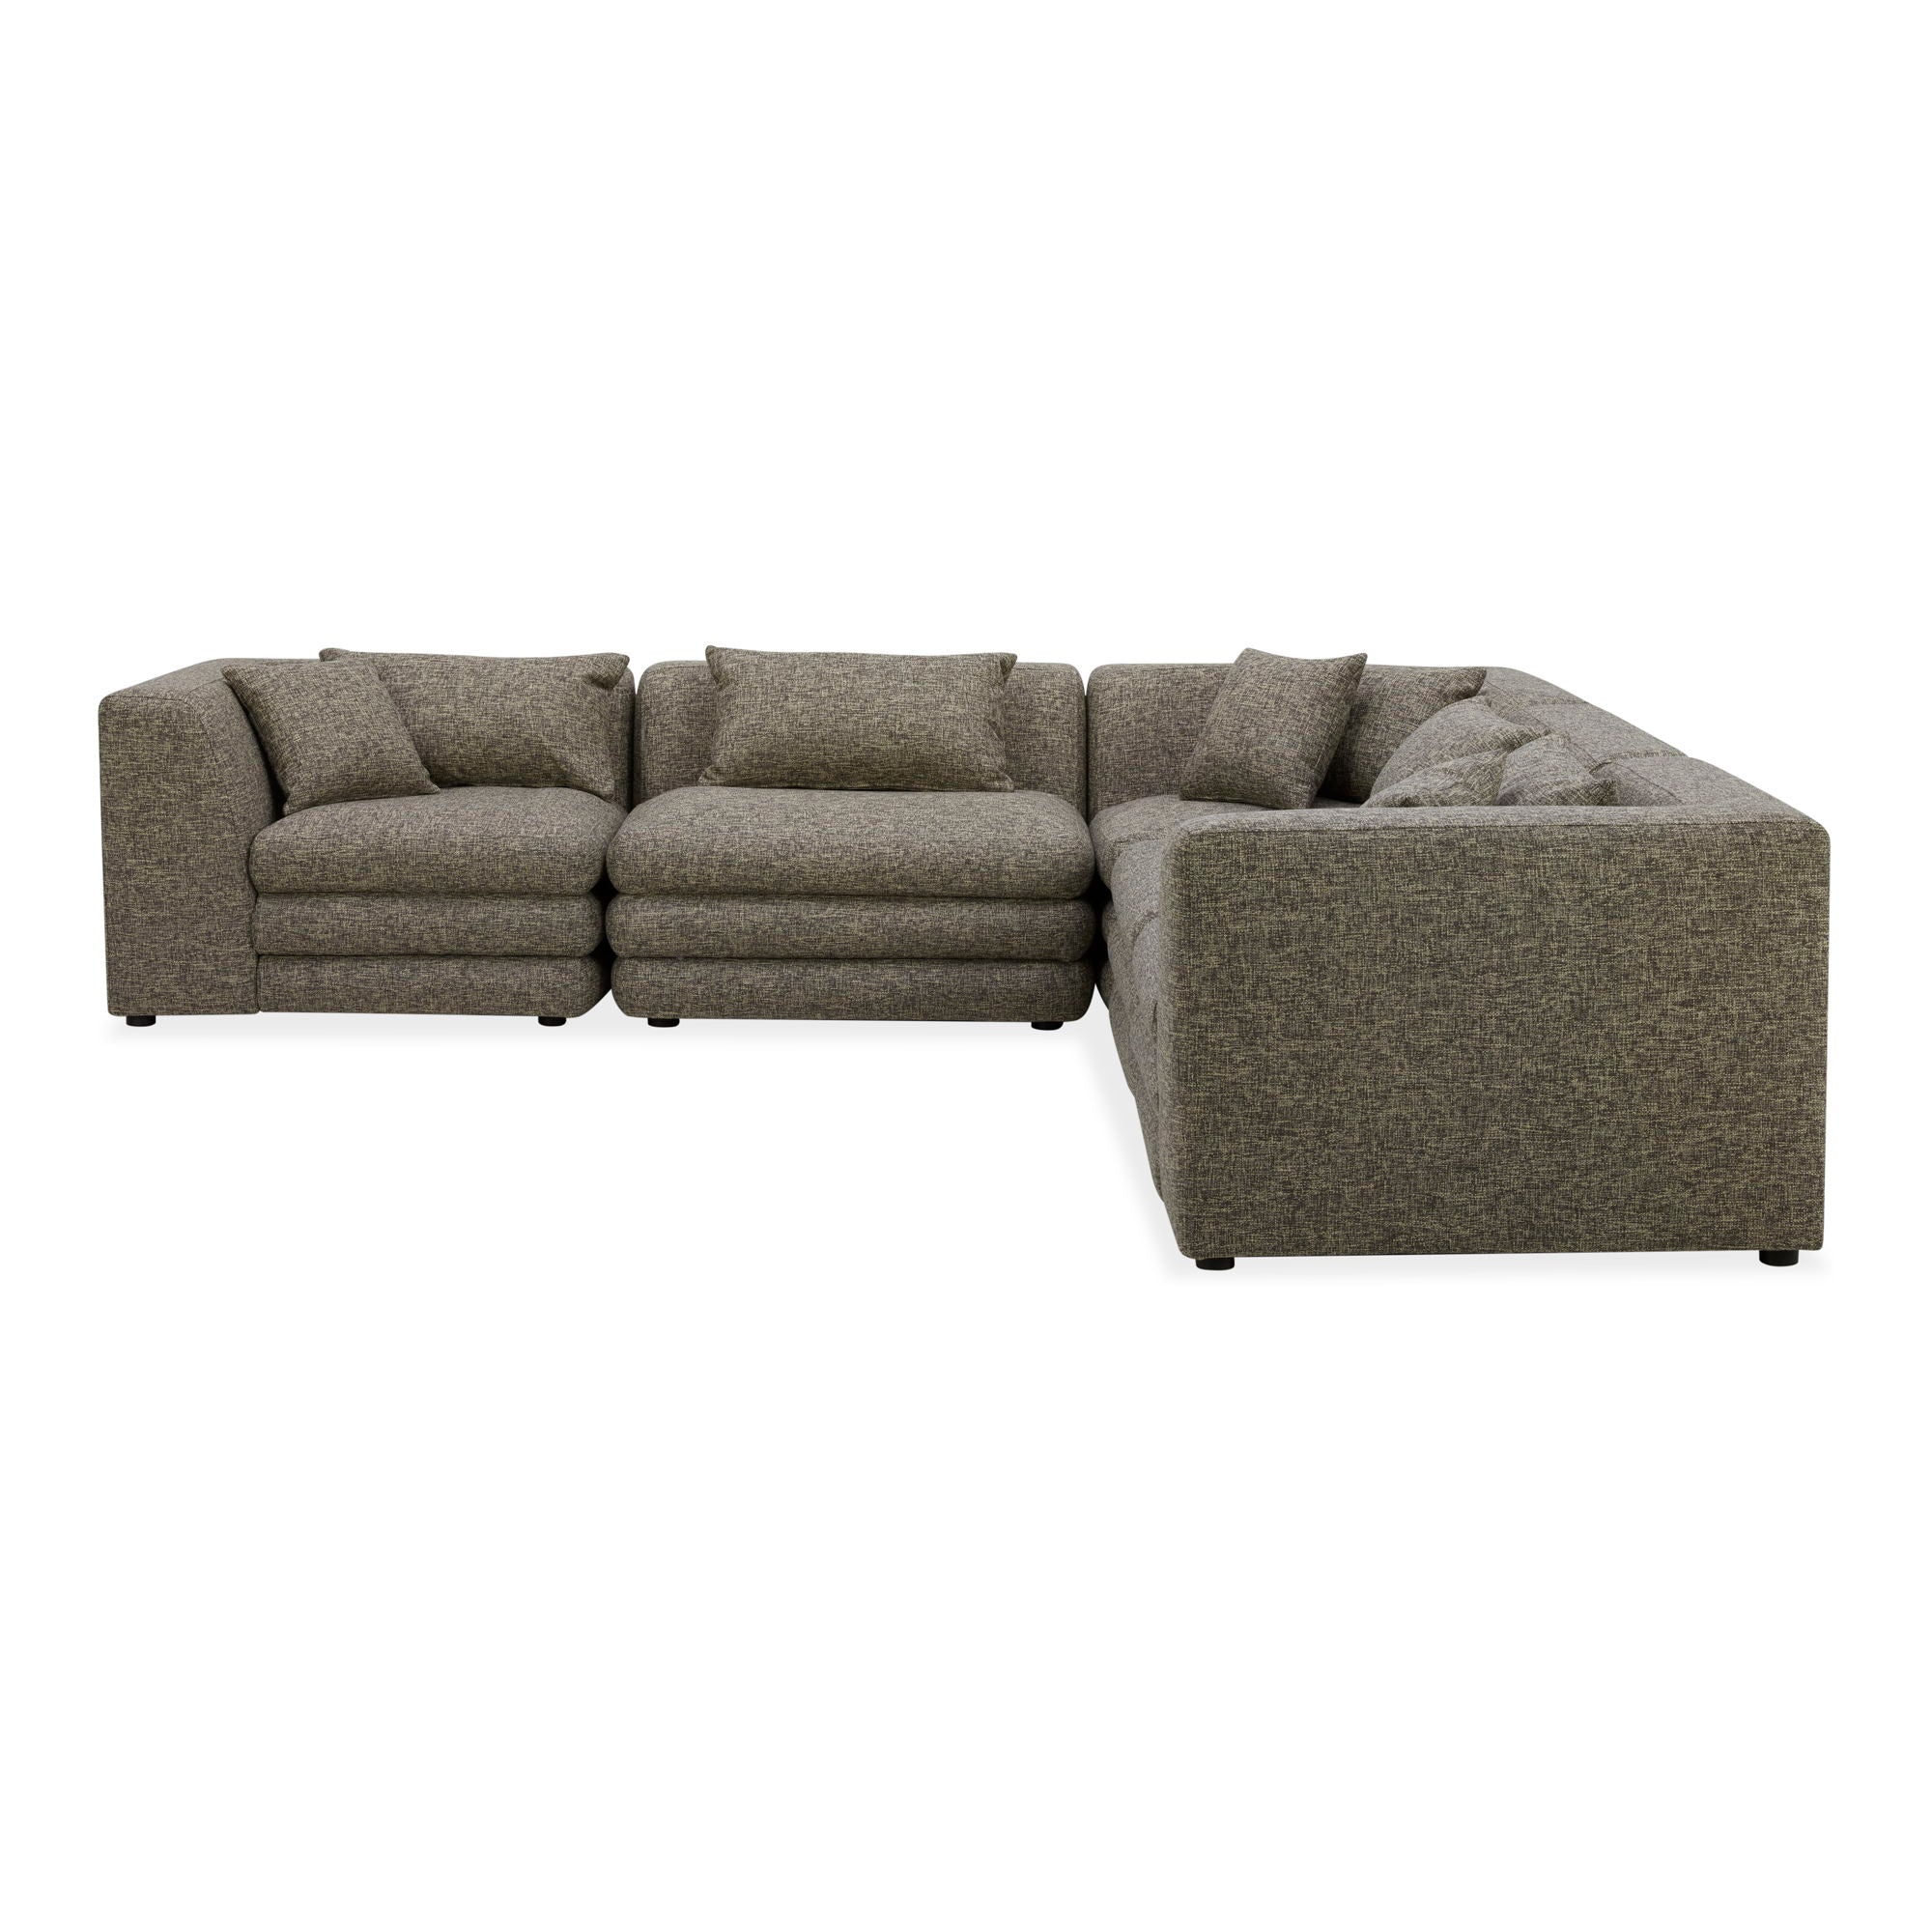 Lowtide - Classic L Modular Sectional - Surie Shadow-Stationary Sectionals-American Furniture Outlet